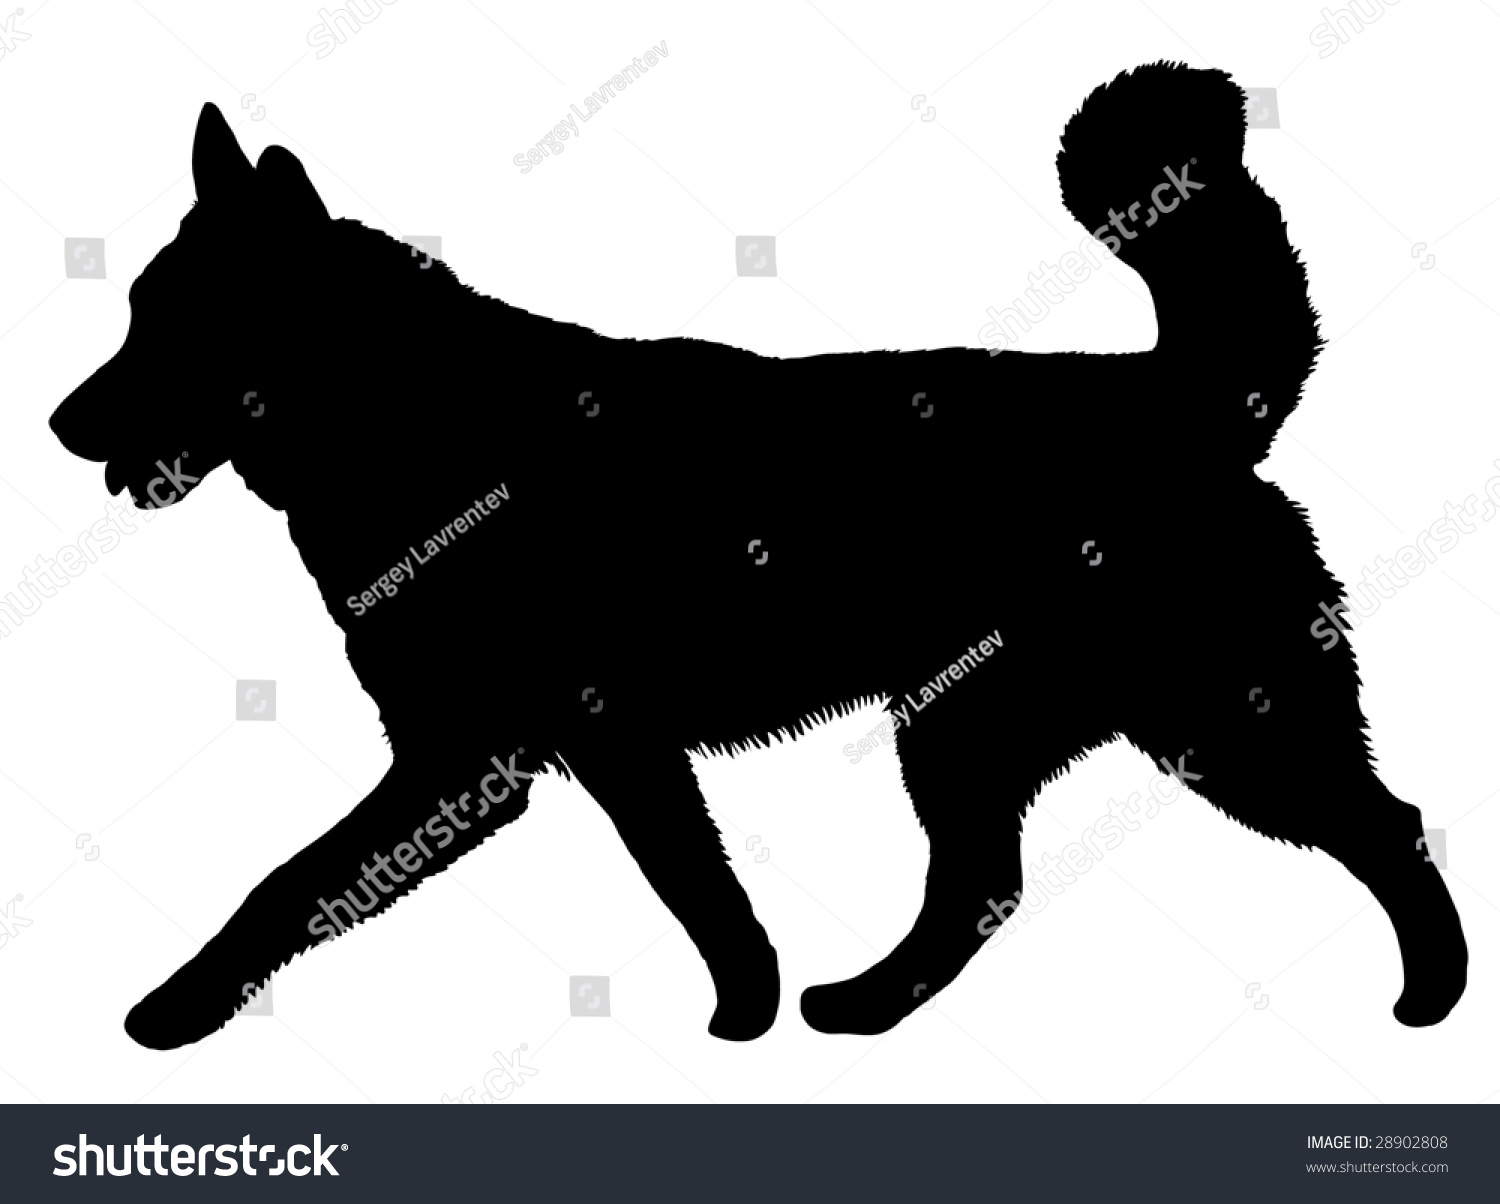 Silhouette Of A Dog Of Breed Alaskan Malamute Stock Vector Illustration ...